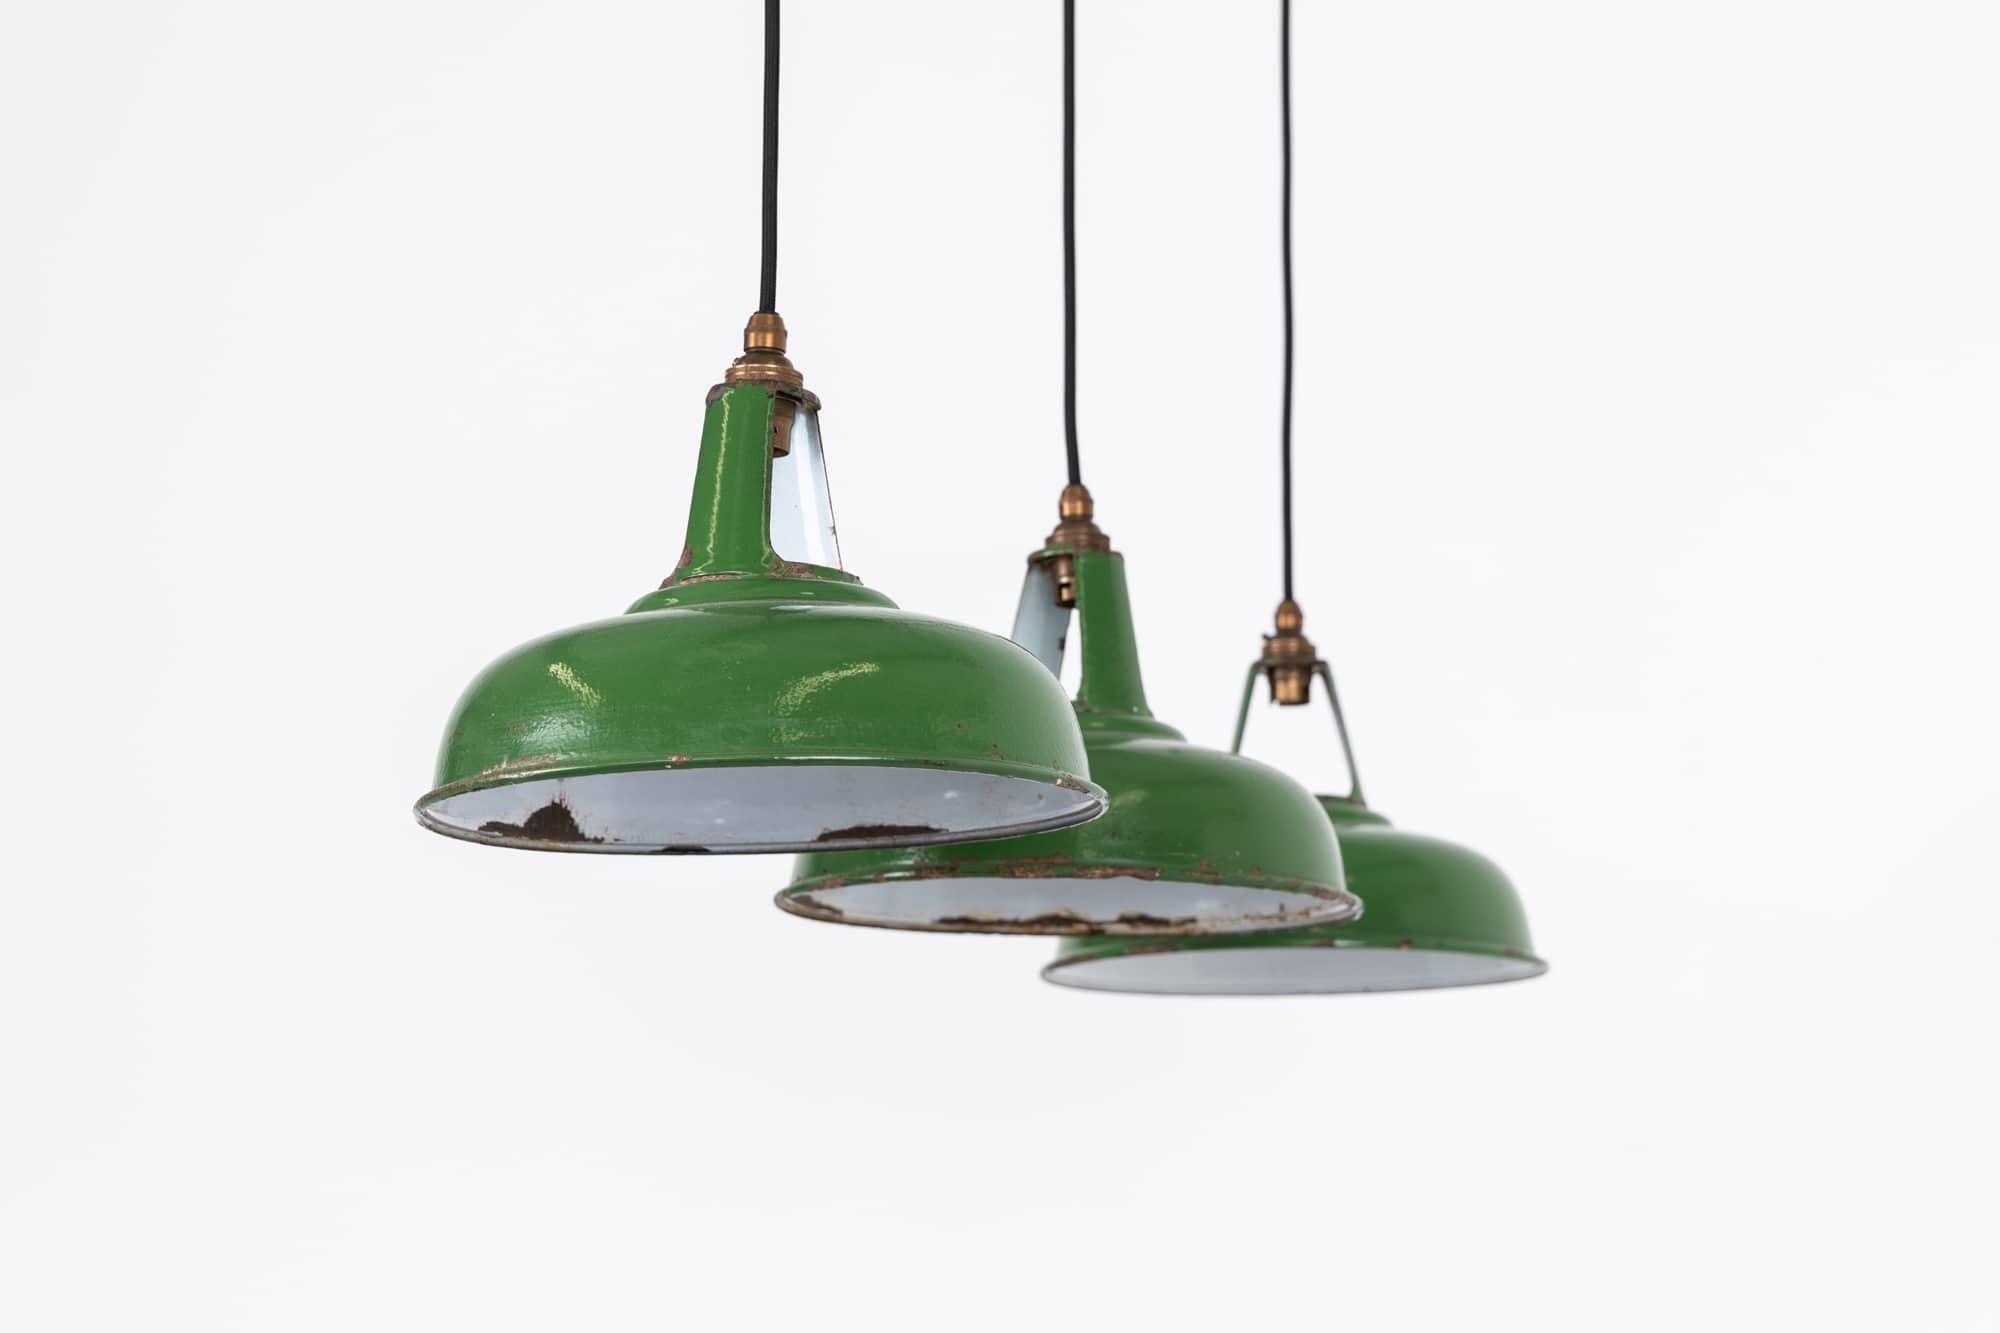 English Vintage Industrial Coolicon Green Enamel Factory Pendant Light, C.1930 For Sale